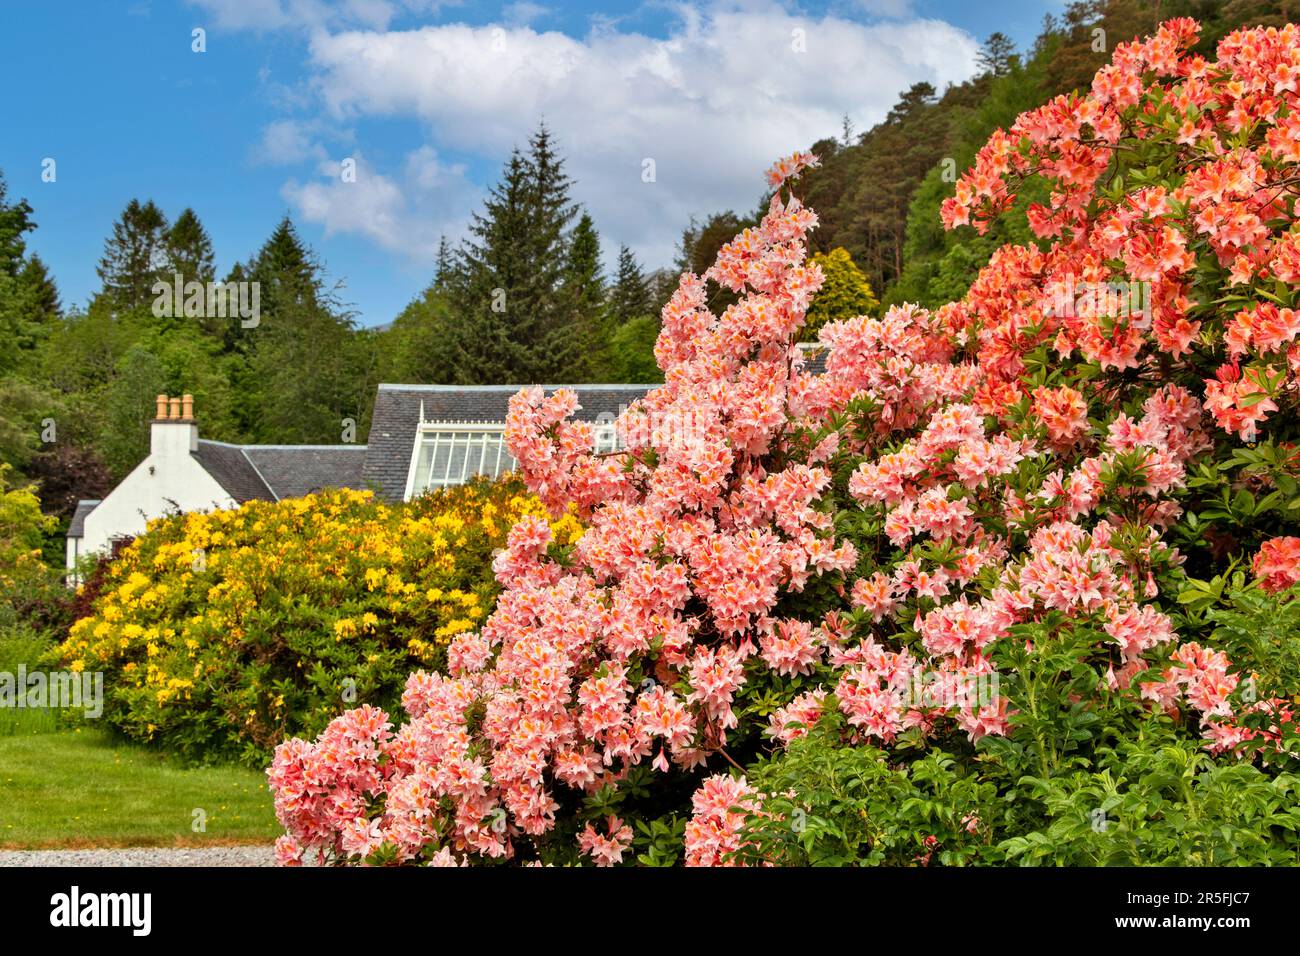 Attadale Gardens Wester Ross Scotland the gardens greenhouse and yellow Azalea flowers and pink and orange Rhododendron flowers Stock Photo